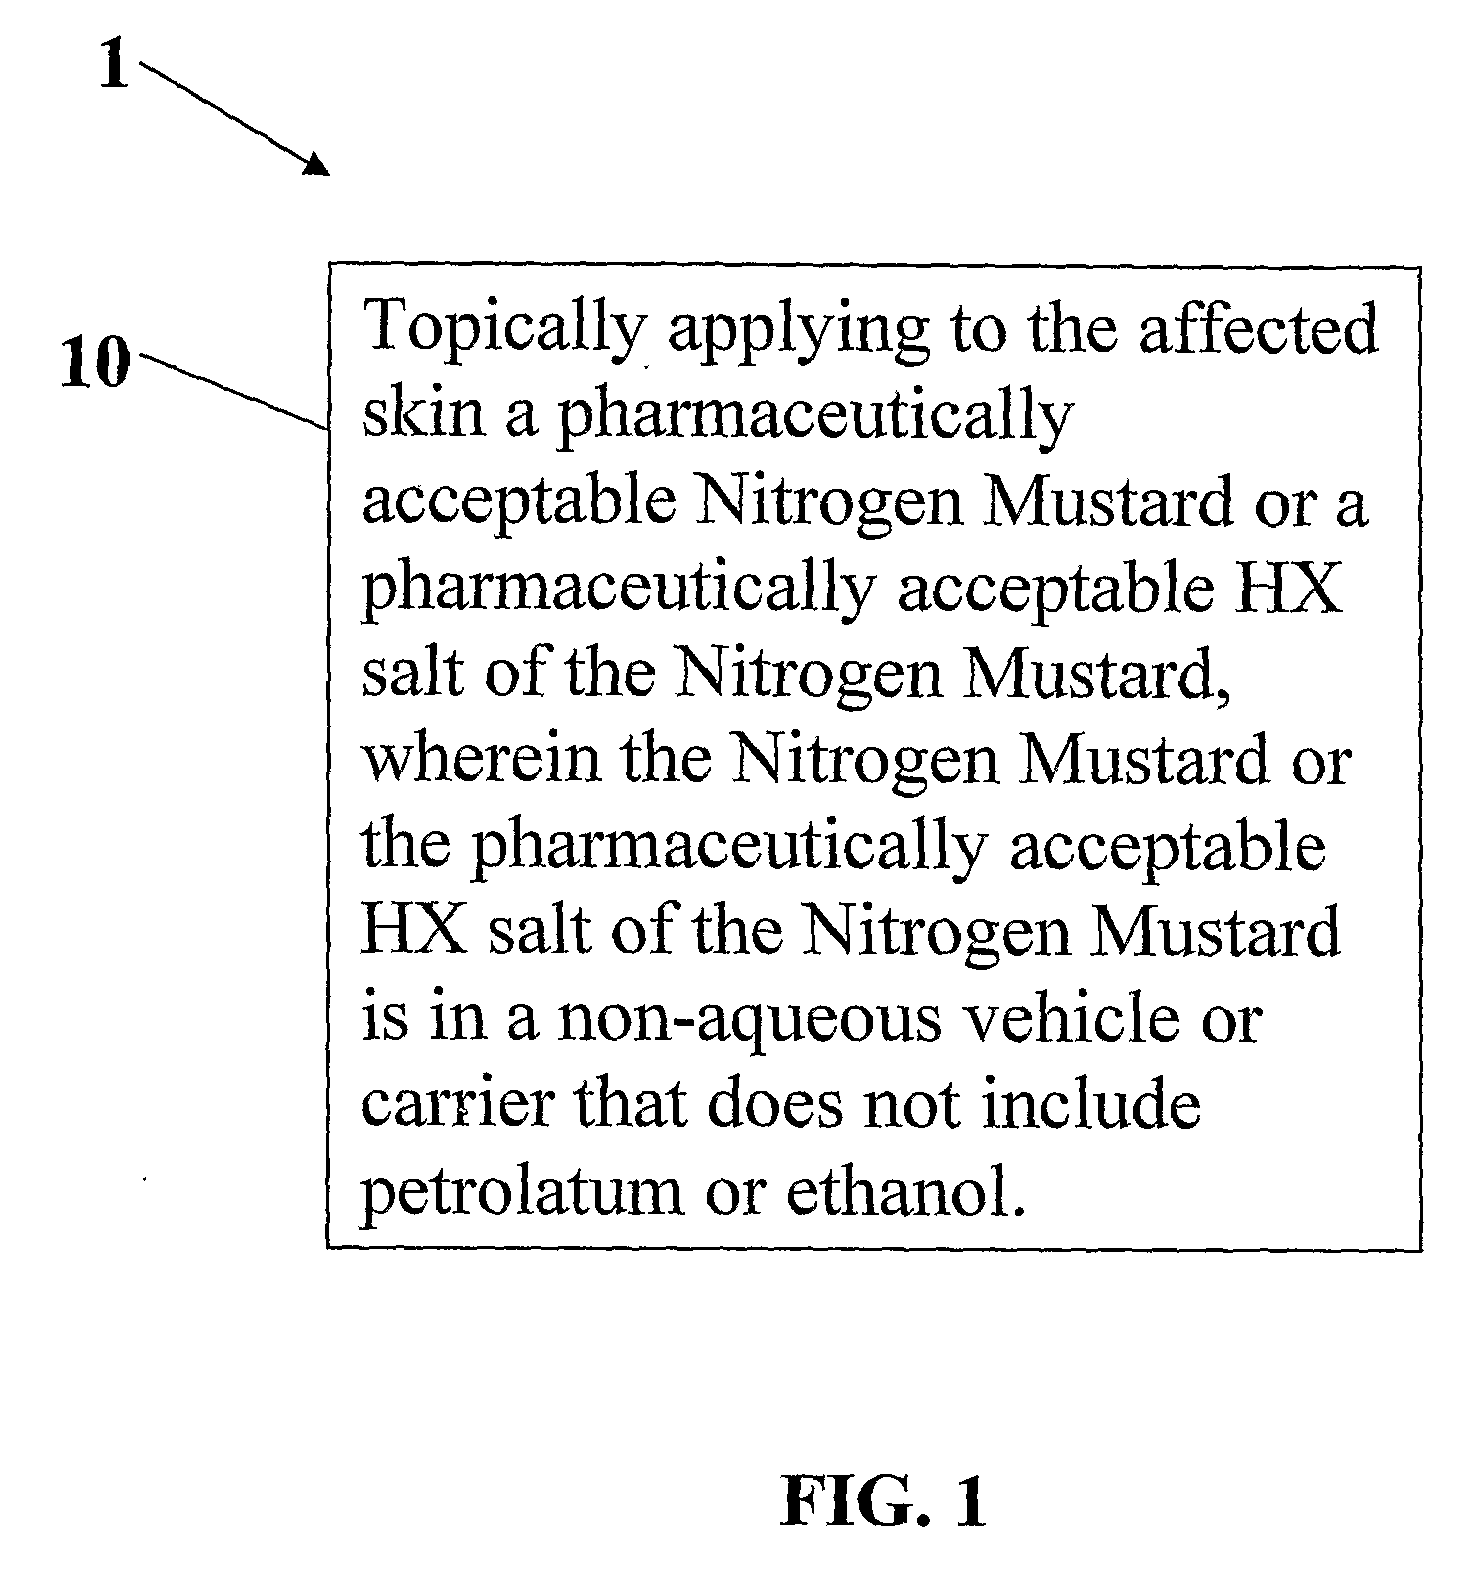 Stabilized Compositions of Volatile Alkylating Agents and Methods of Using Thereof